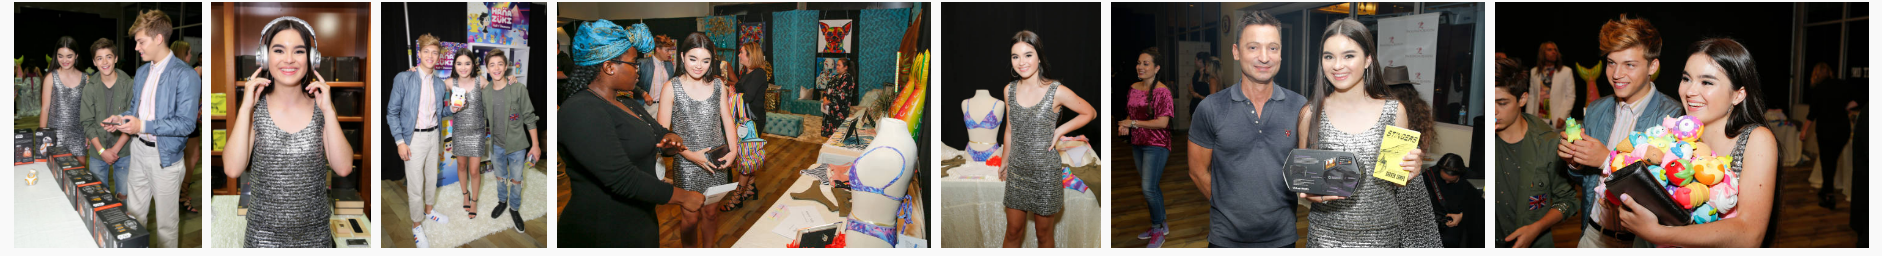 Landry Bender - Backstage Creations Celebrity Retreat at Teen Choice 2017 - Day 2 at Galen Center on August 13, 2017 in Los Angeles